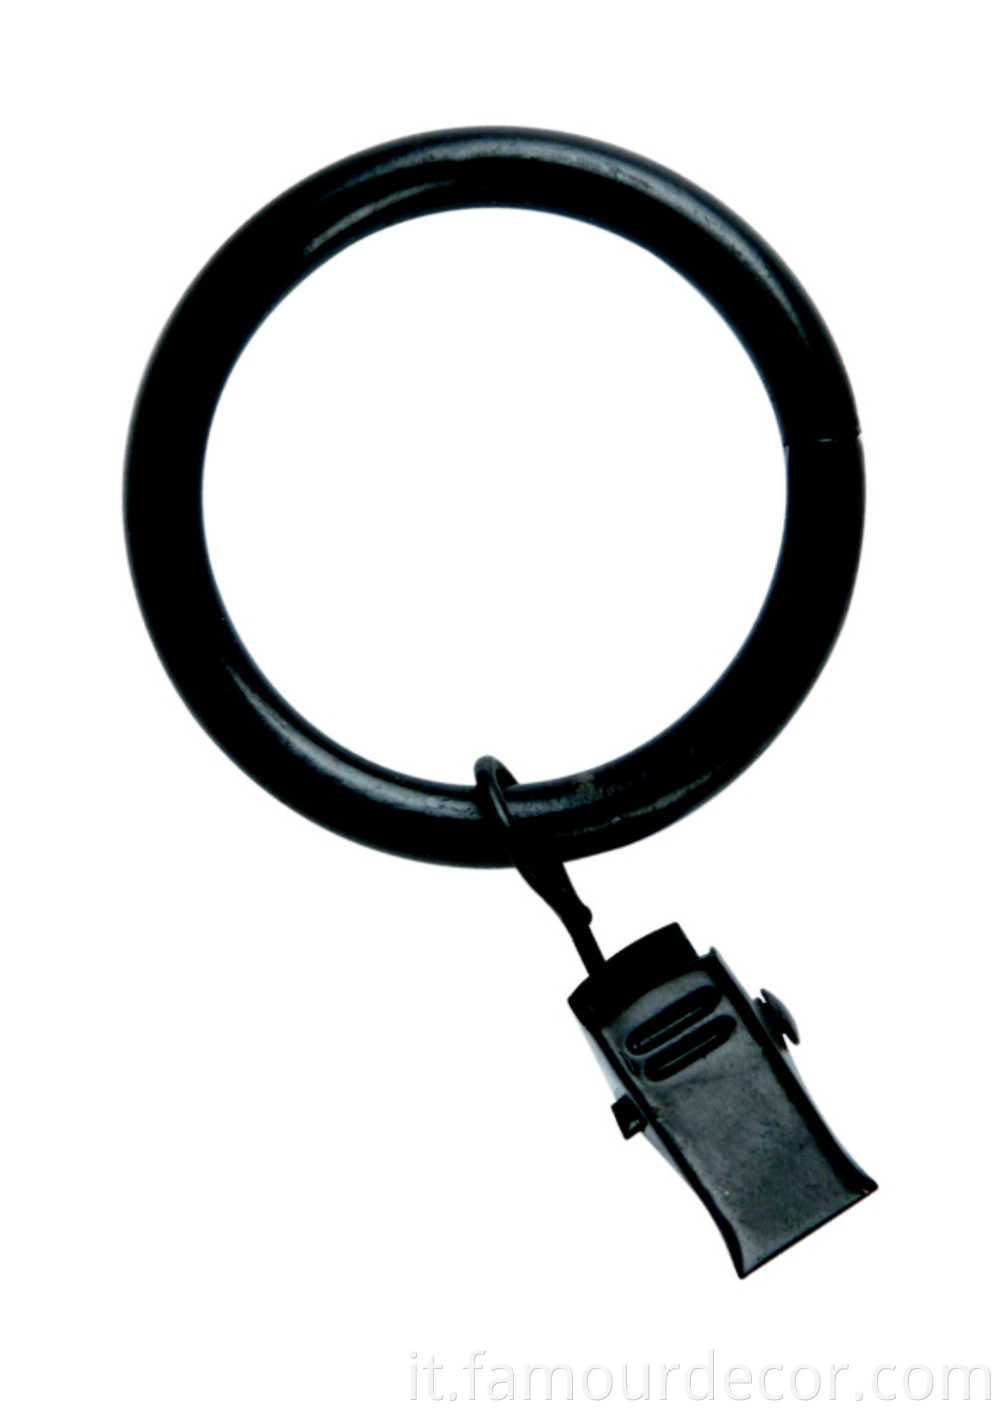 Curtain rod ring with clip